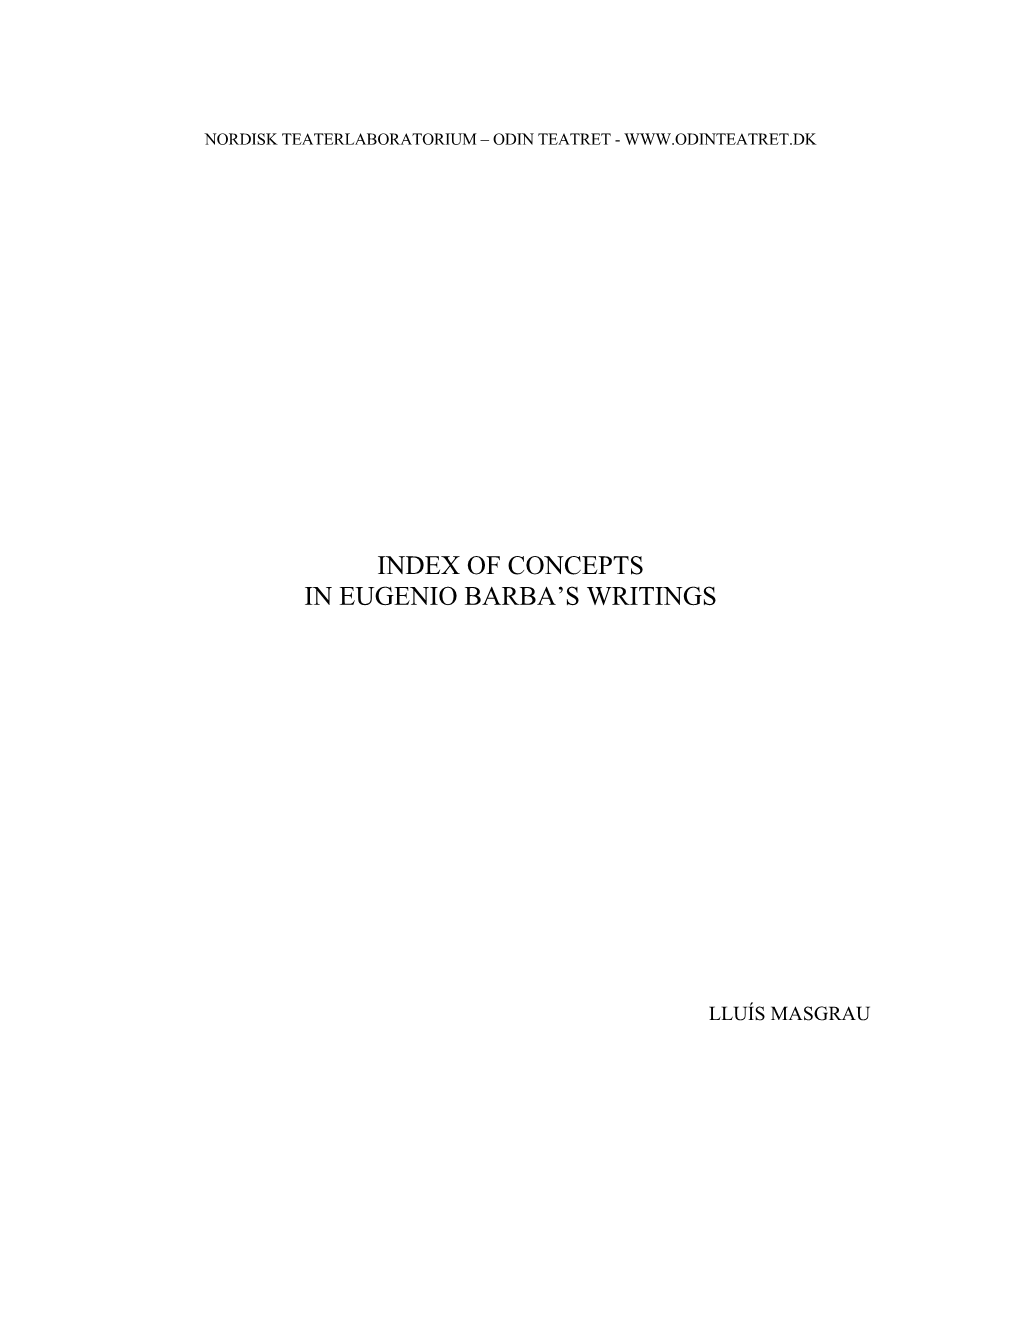 Index of Concepts in Eugenio Barba's Writings